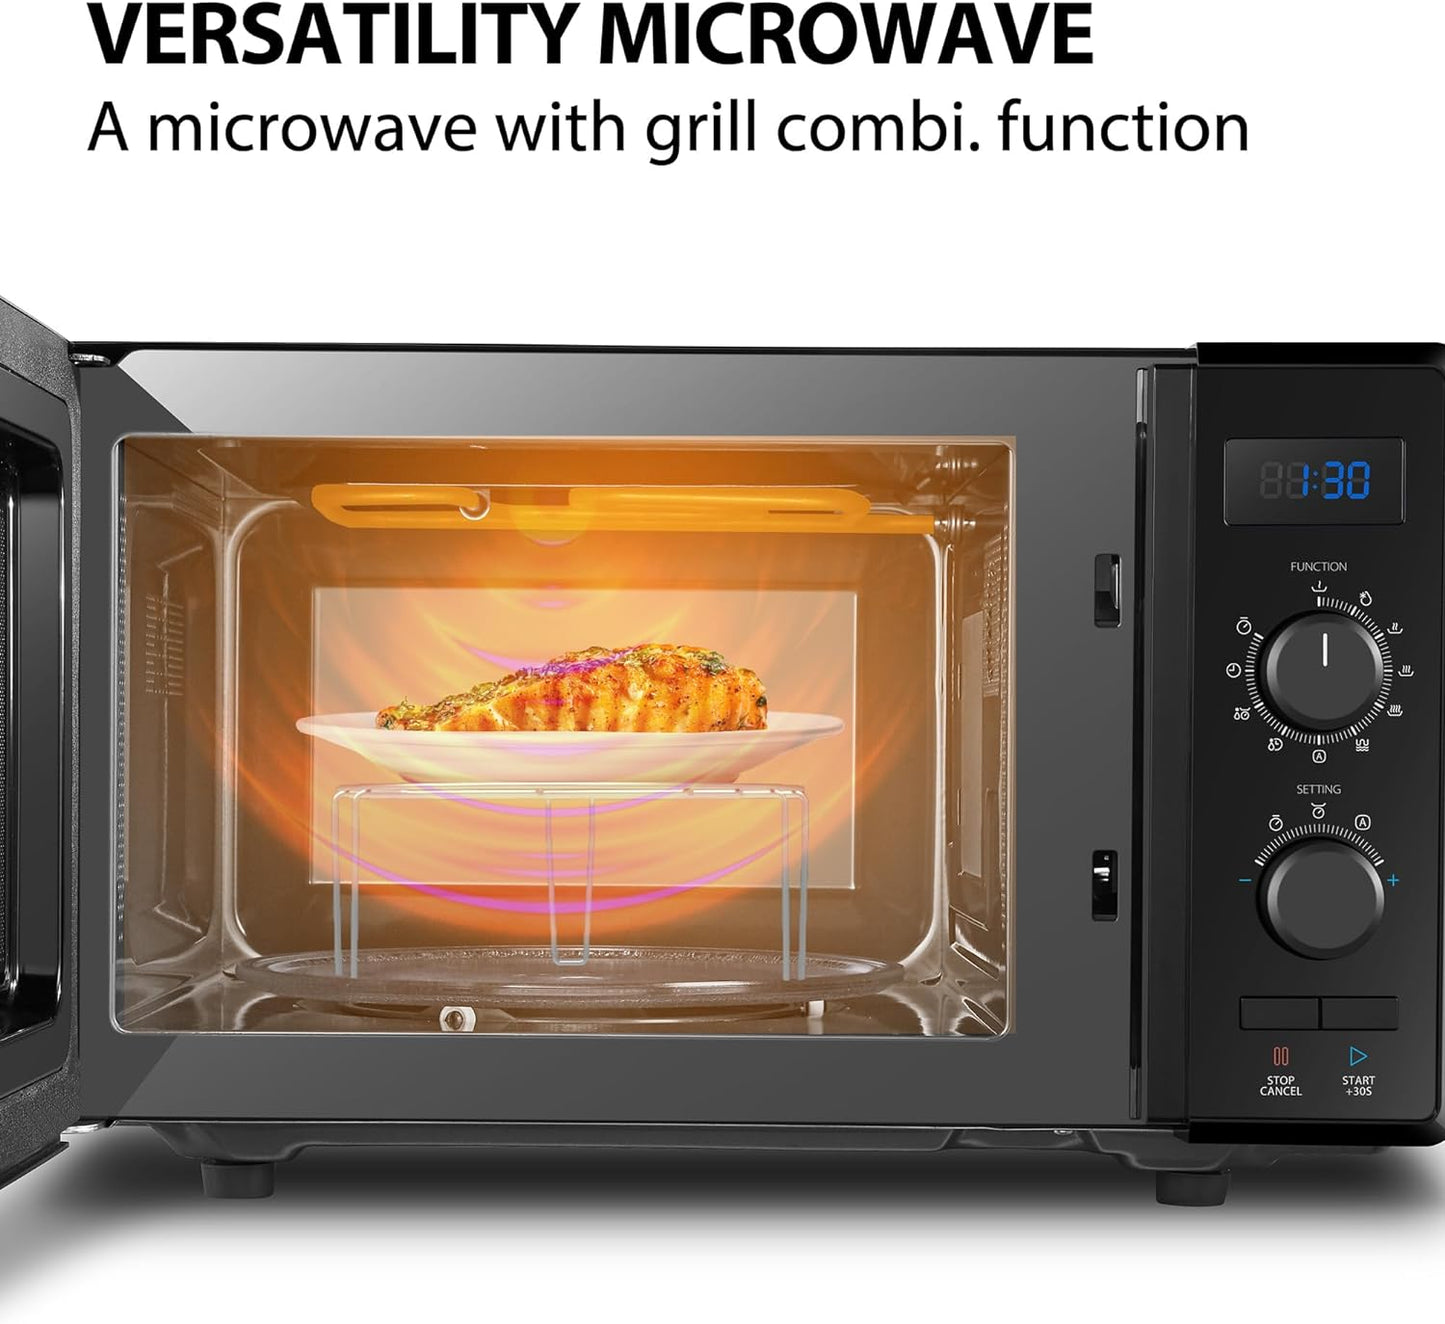 Toshiba 900 w 23 L Microwave Oven with 1050 w Crispy Grill, Energy Saving Eco Function, 8 Auto Menus, 5 Power Levels and Position Memory Turntable - Black - MW2-AG23PF(BK)